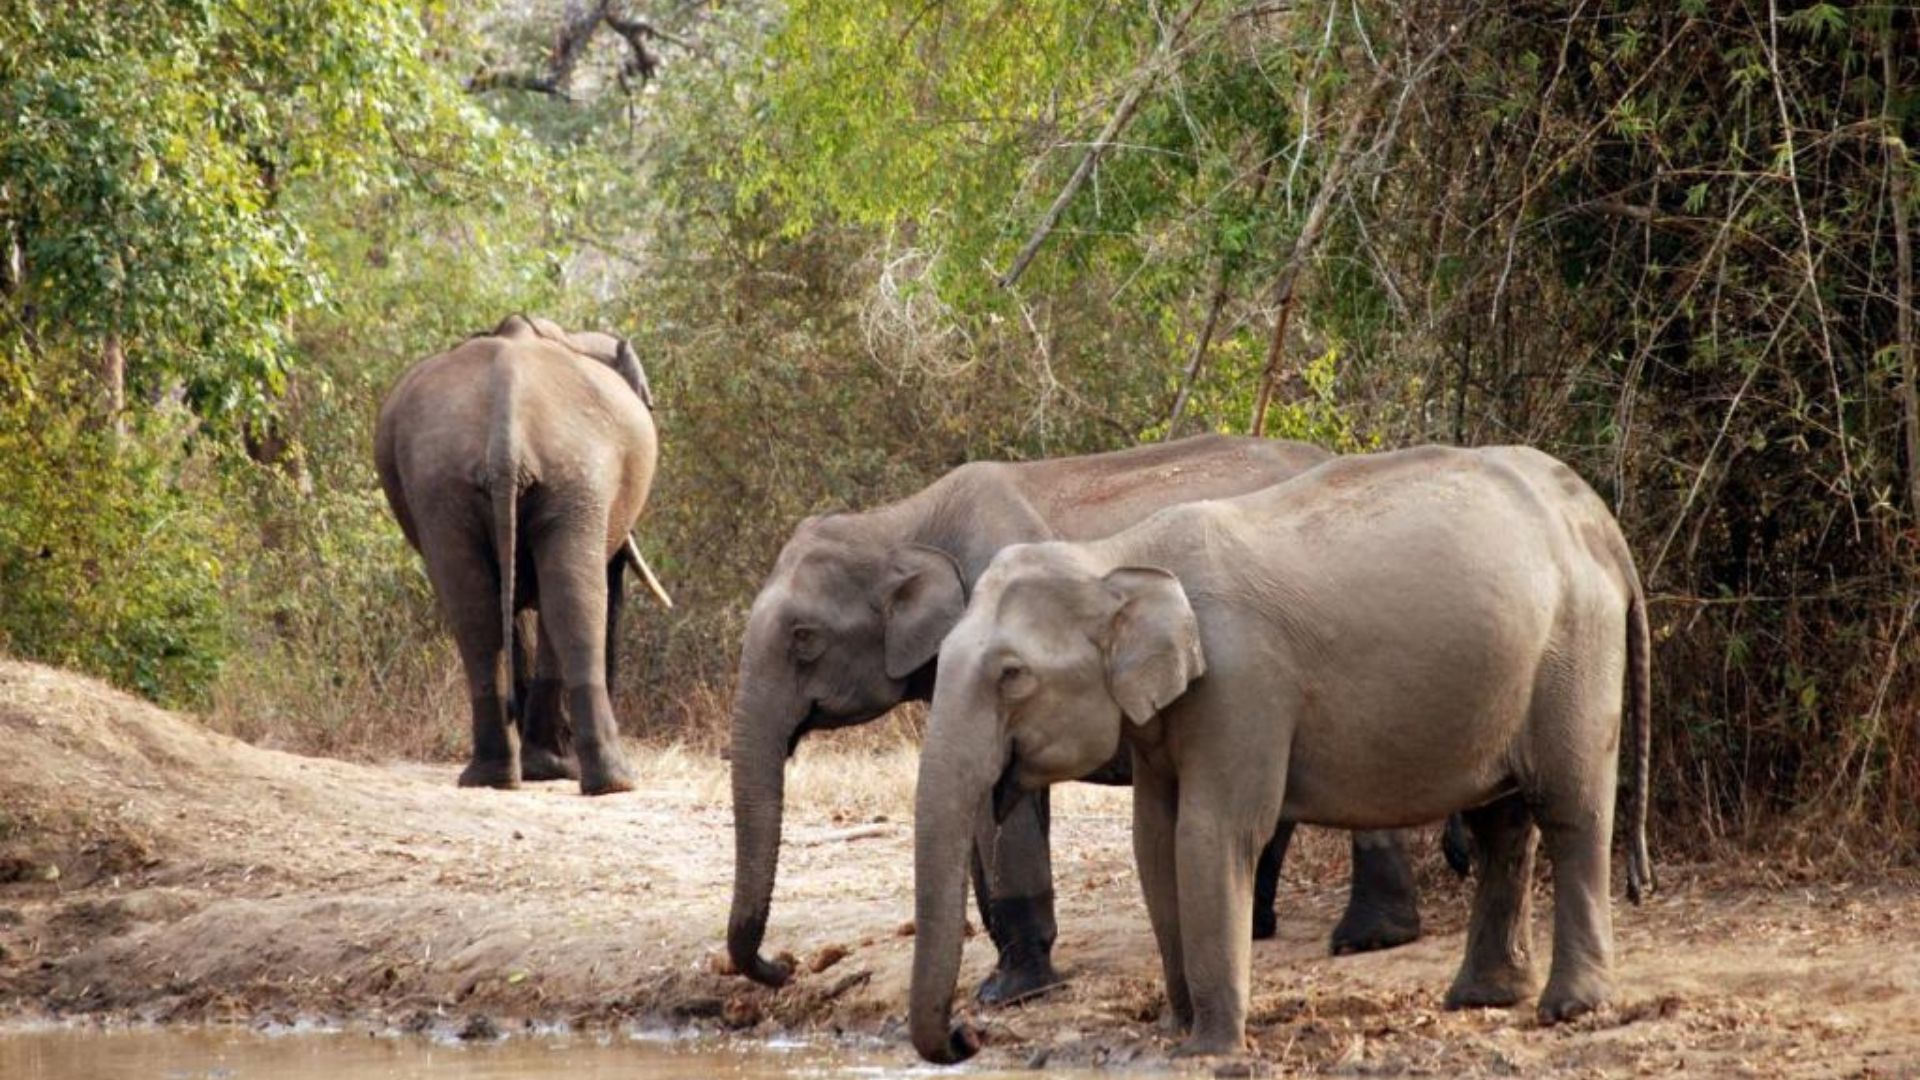 Wild Elephants Spotted in Kodagu (This is just a representative image)